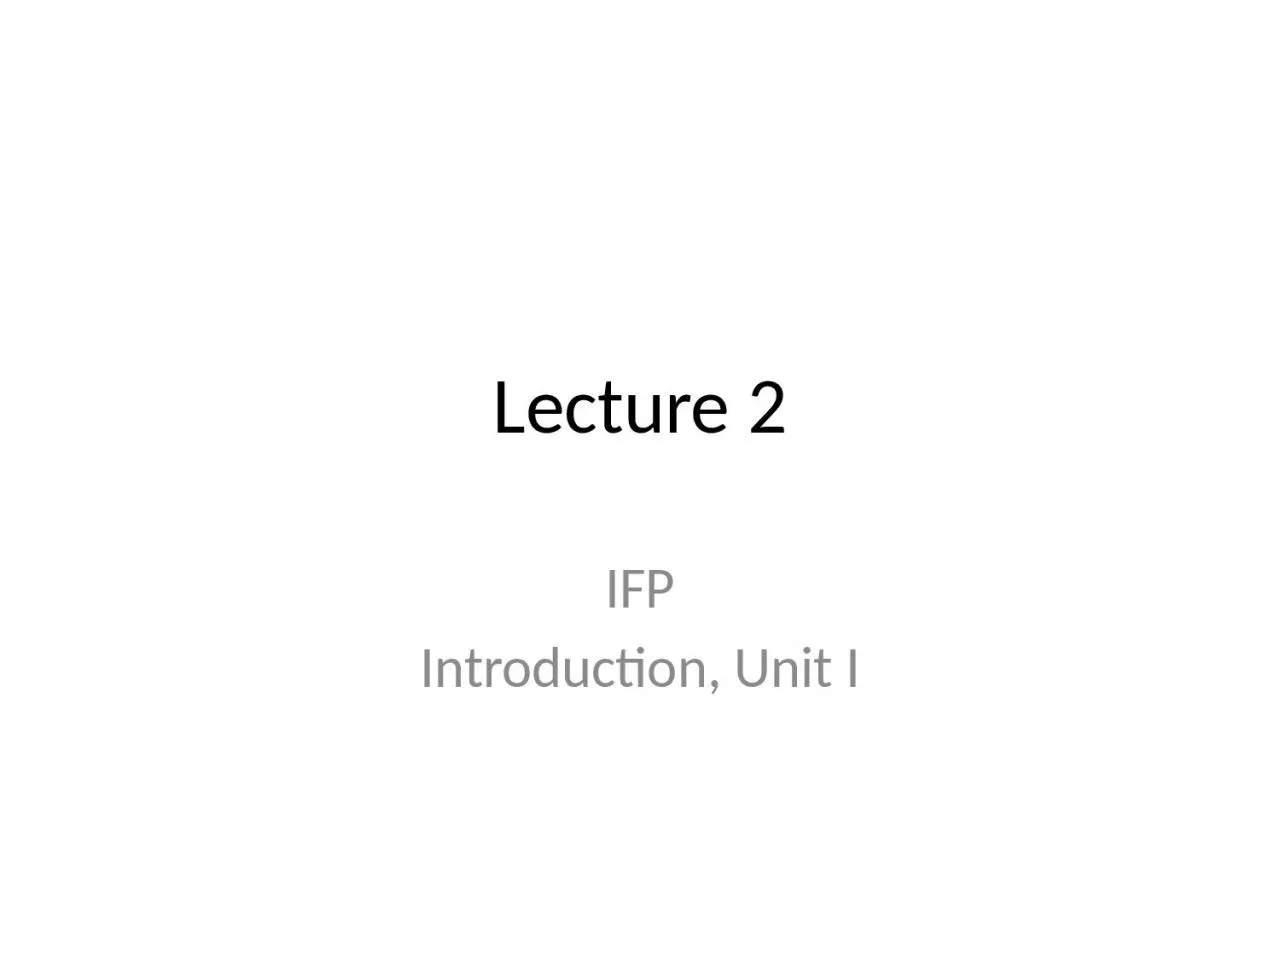 Lecture 2 IFP Introduction, Unit I